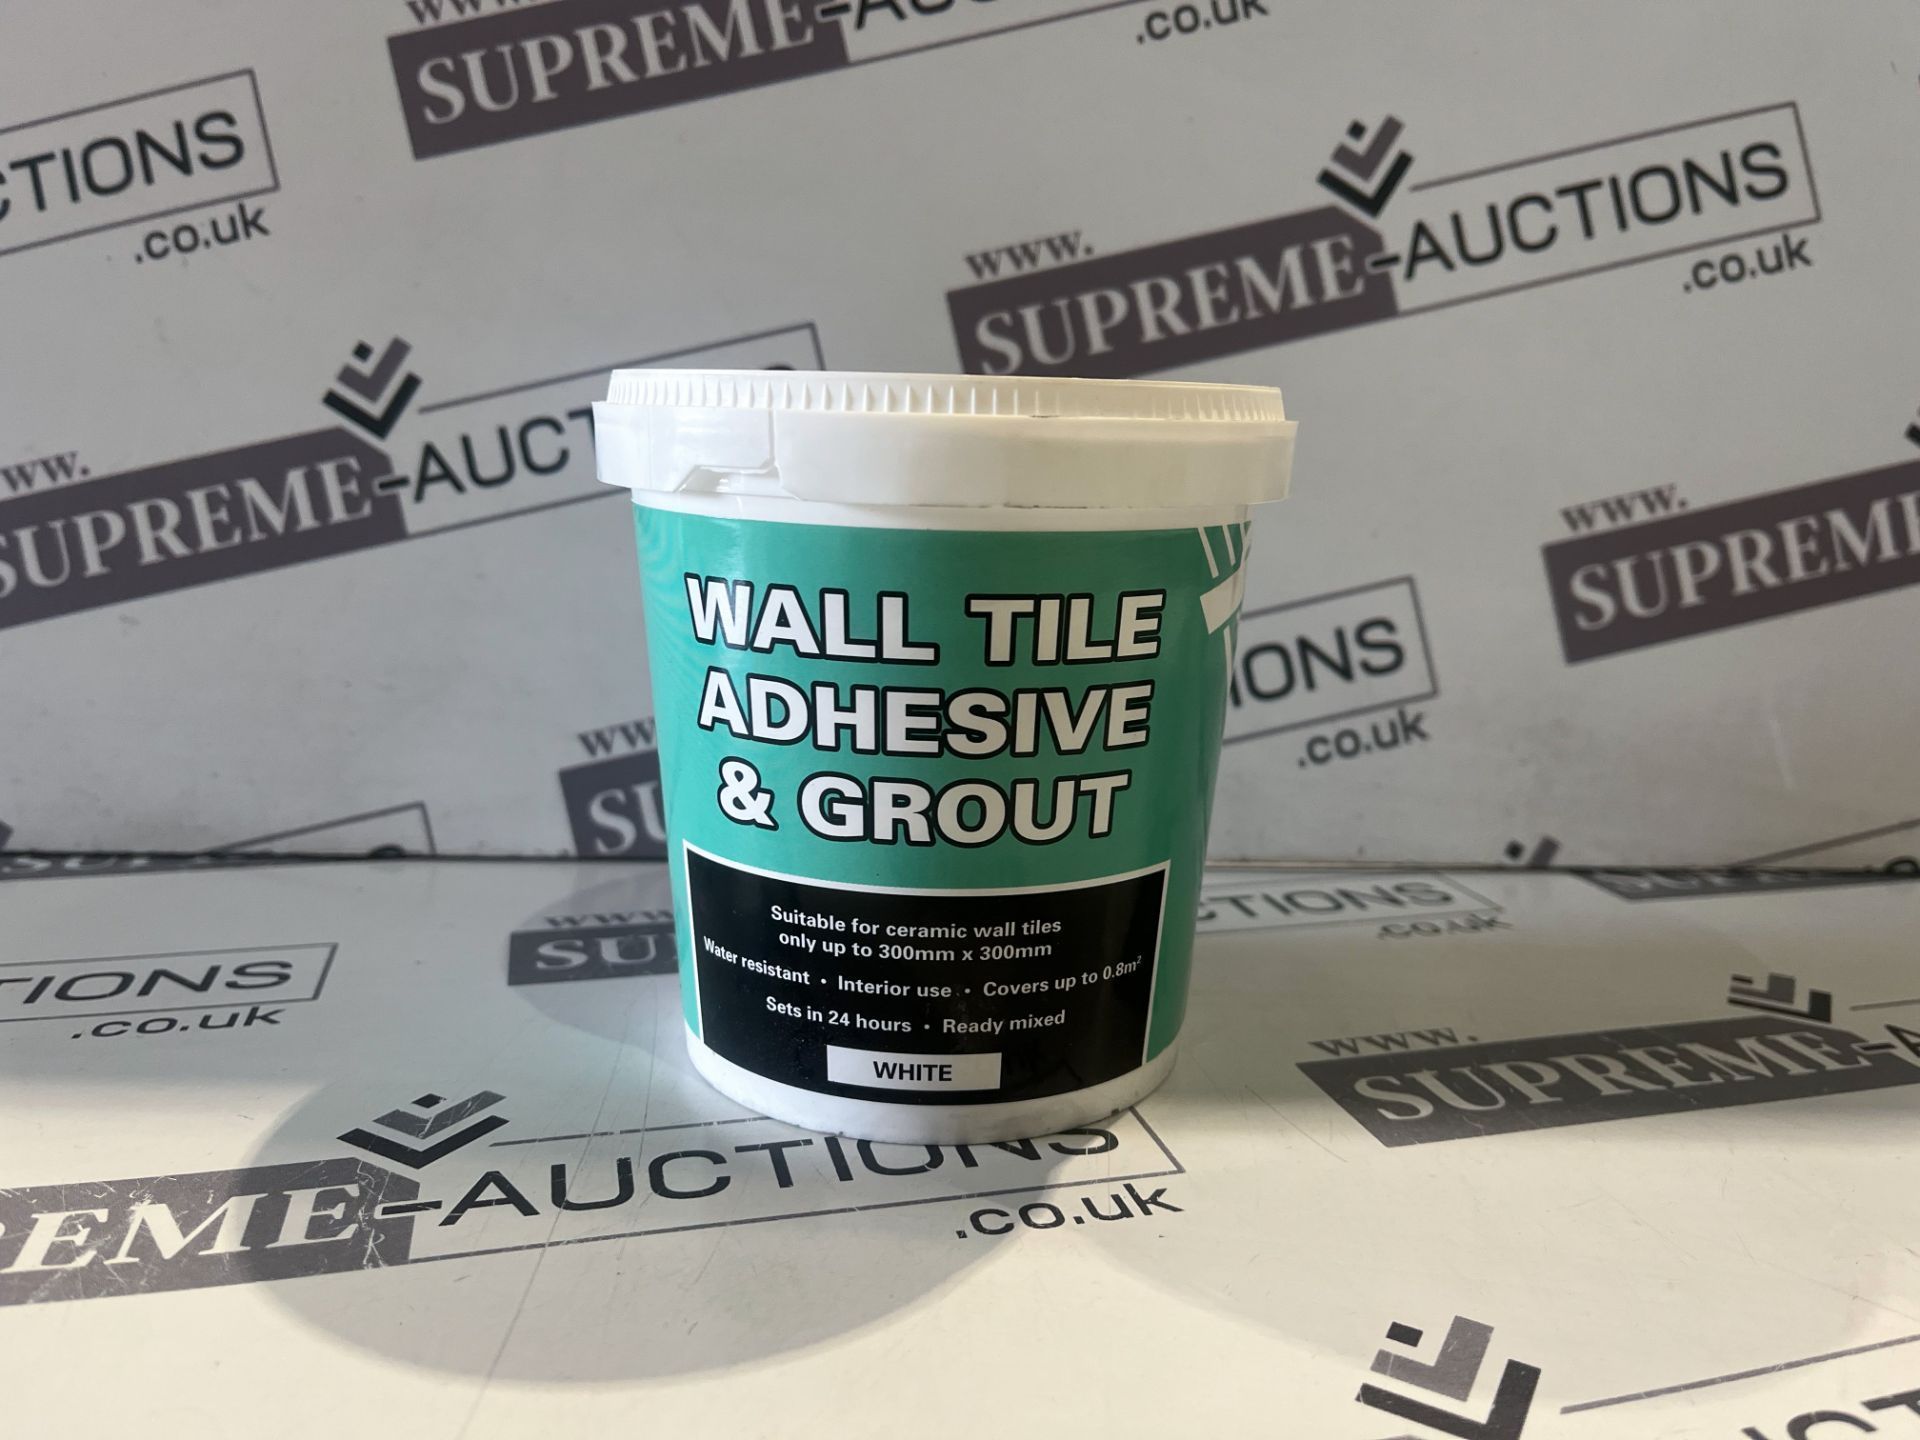 60 X 1KG TUBS OF WALL TILE ADHESIVE & GROUT. SUITABLE FOR CERAMIC WALL TILES. SETS IN 24 HOURS.